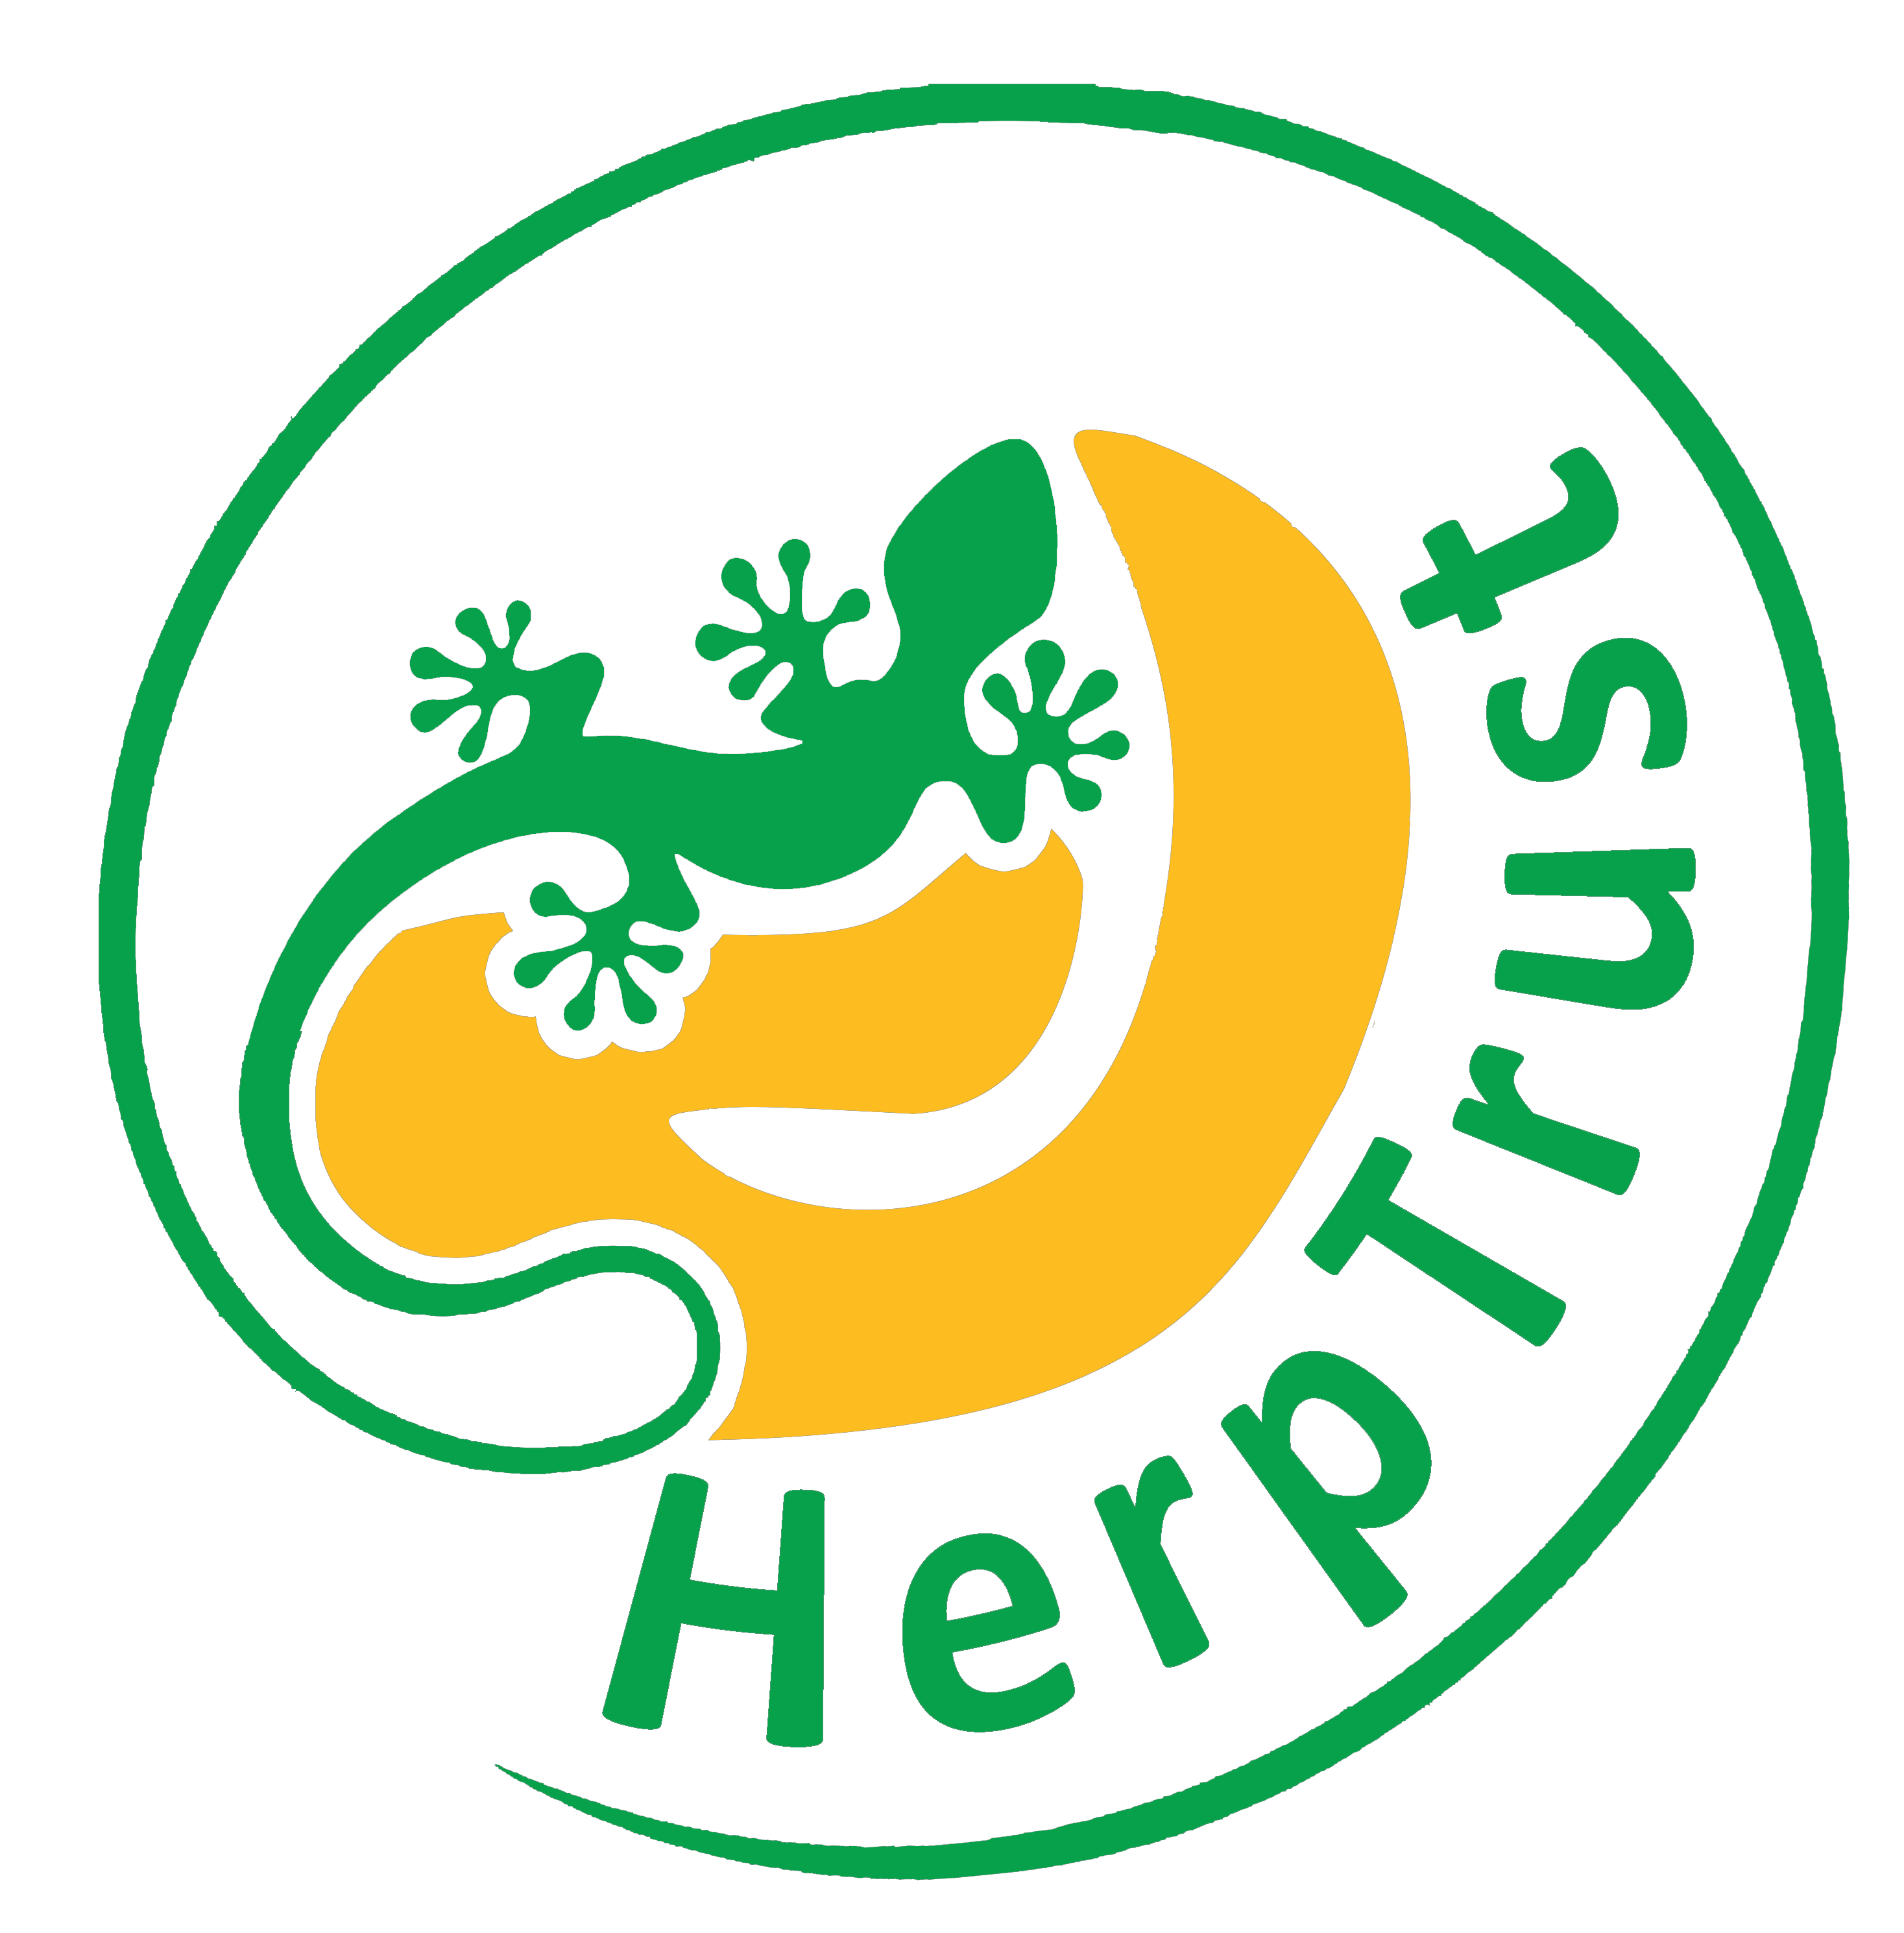 A logo of the project "HerpTrust"